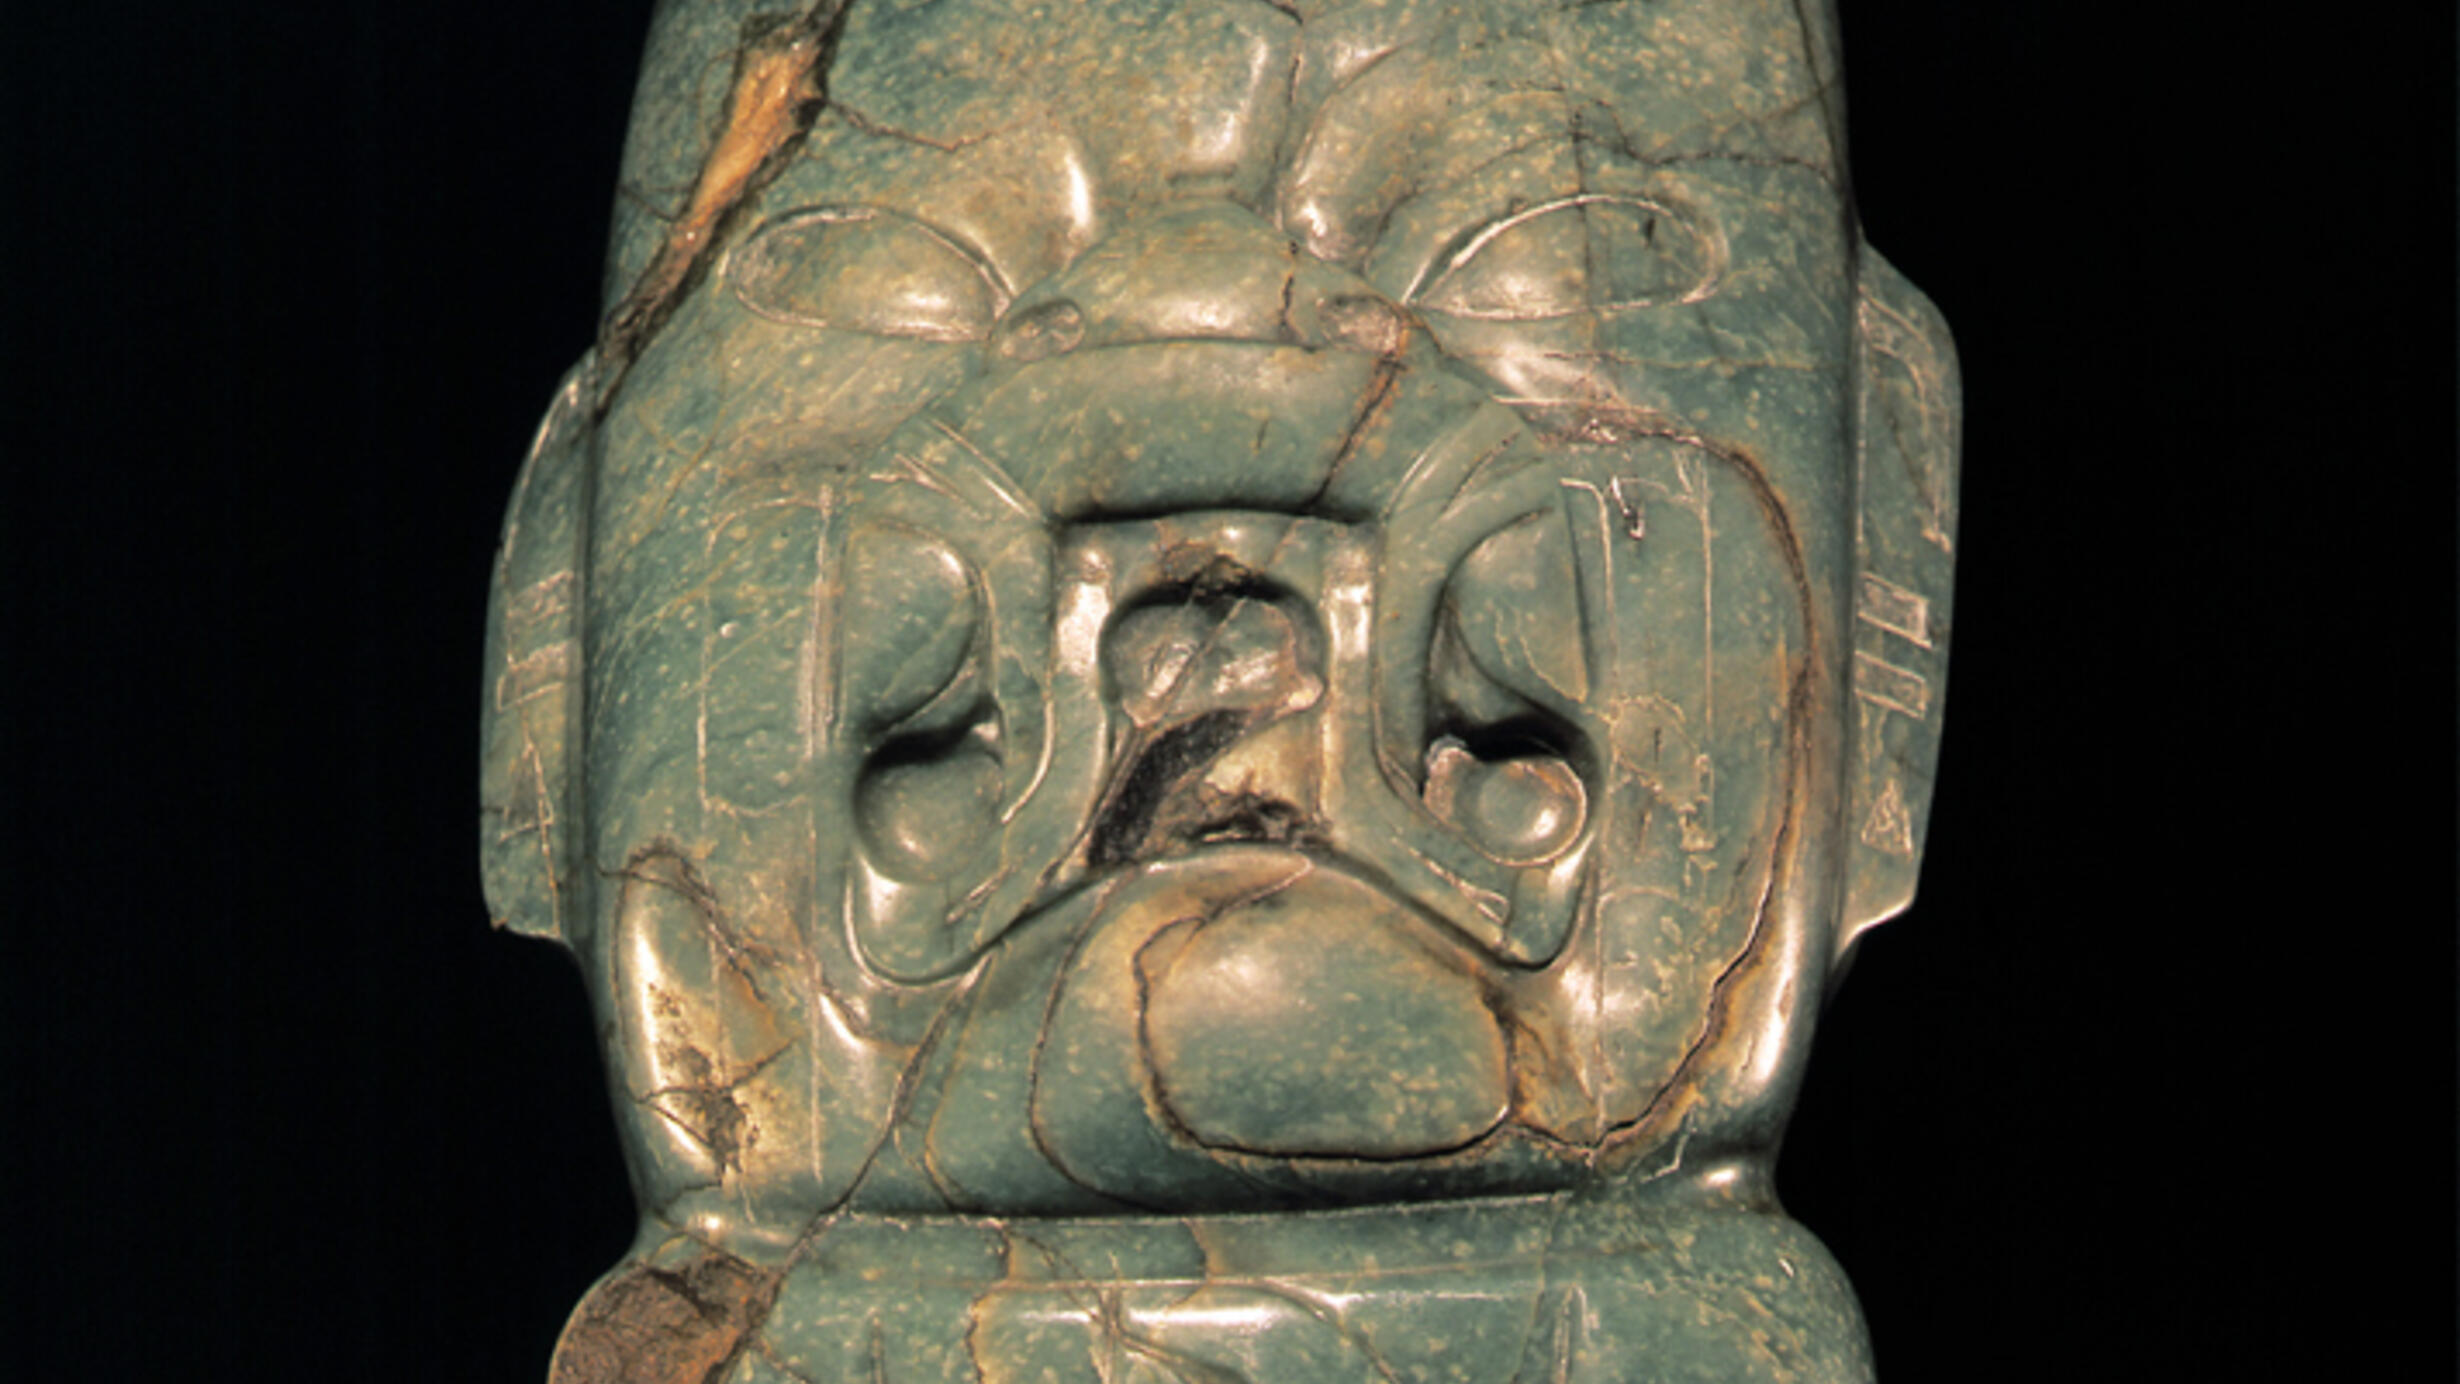 An intricately carved green stone figure.